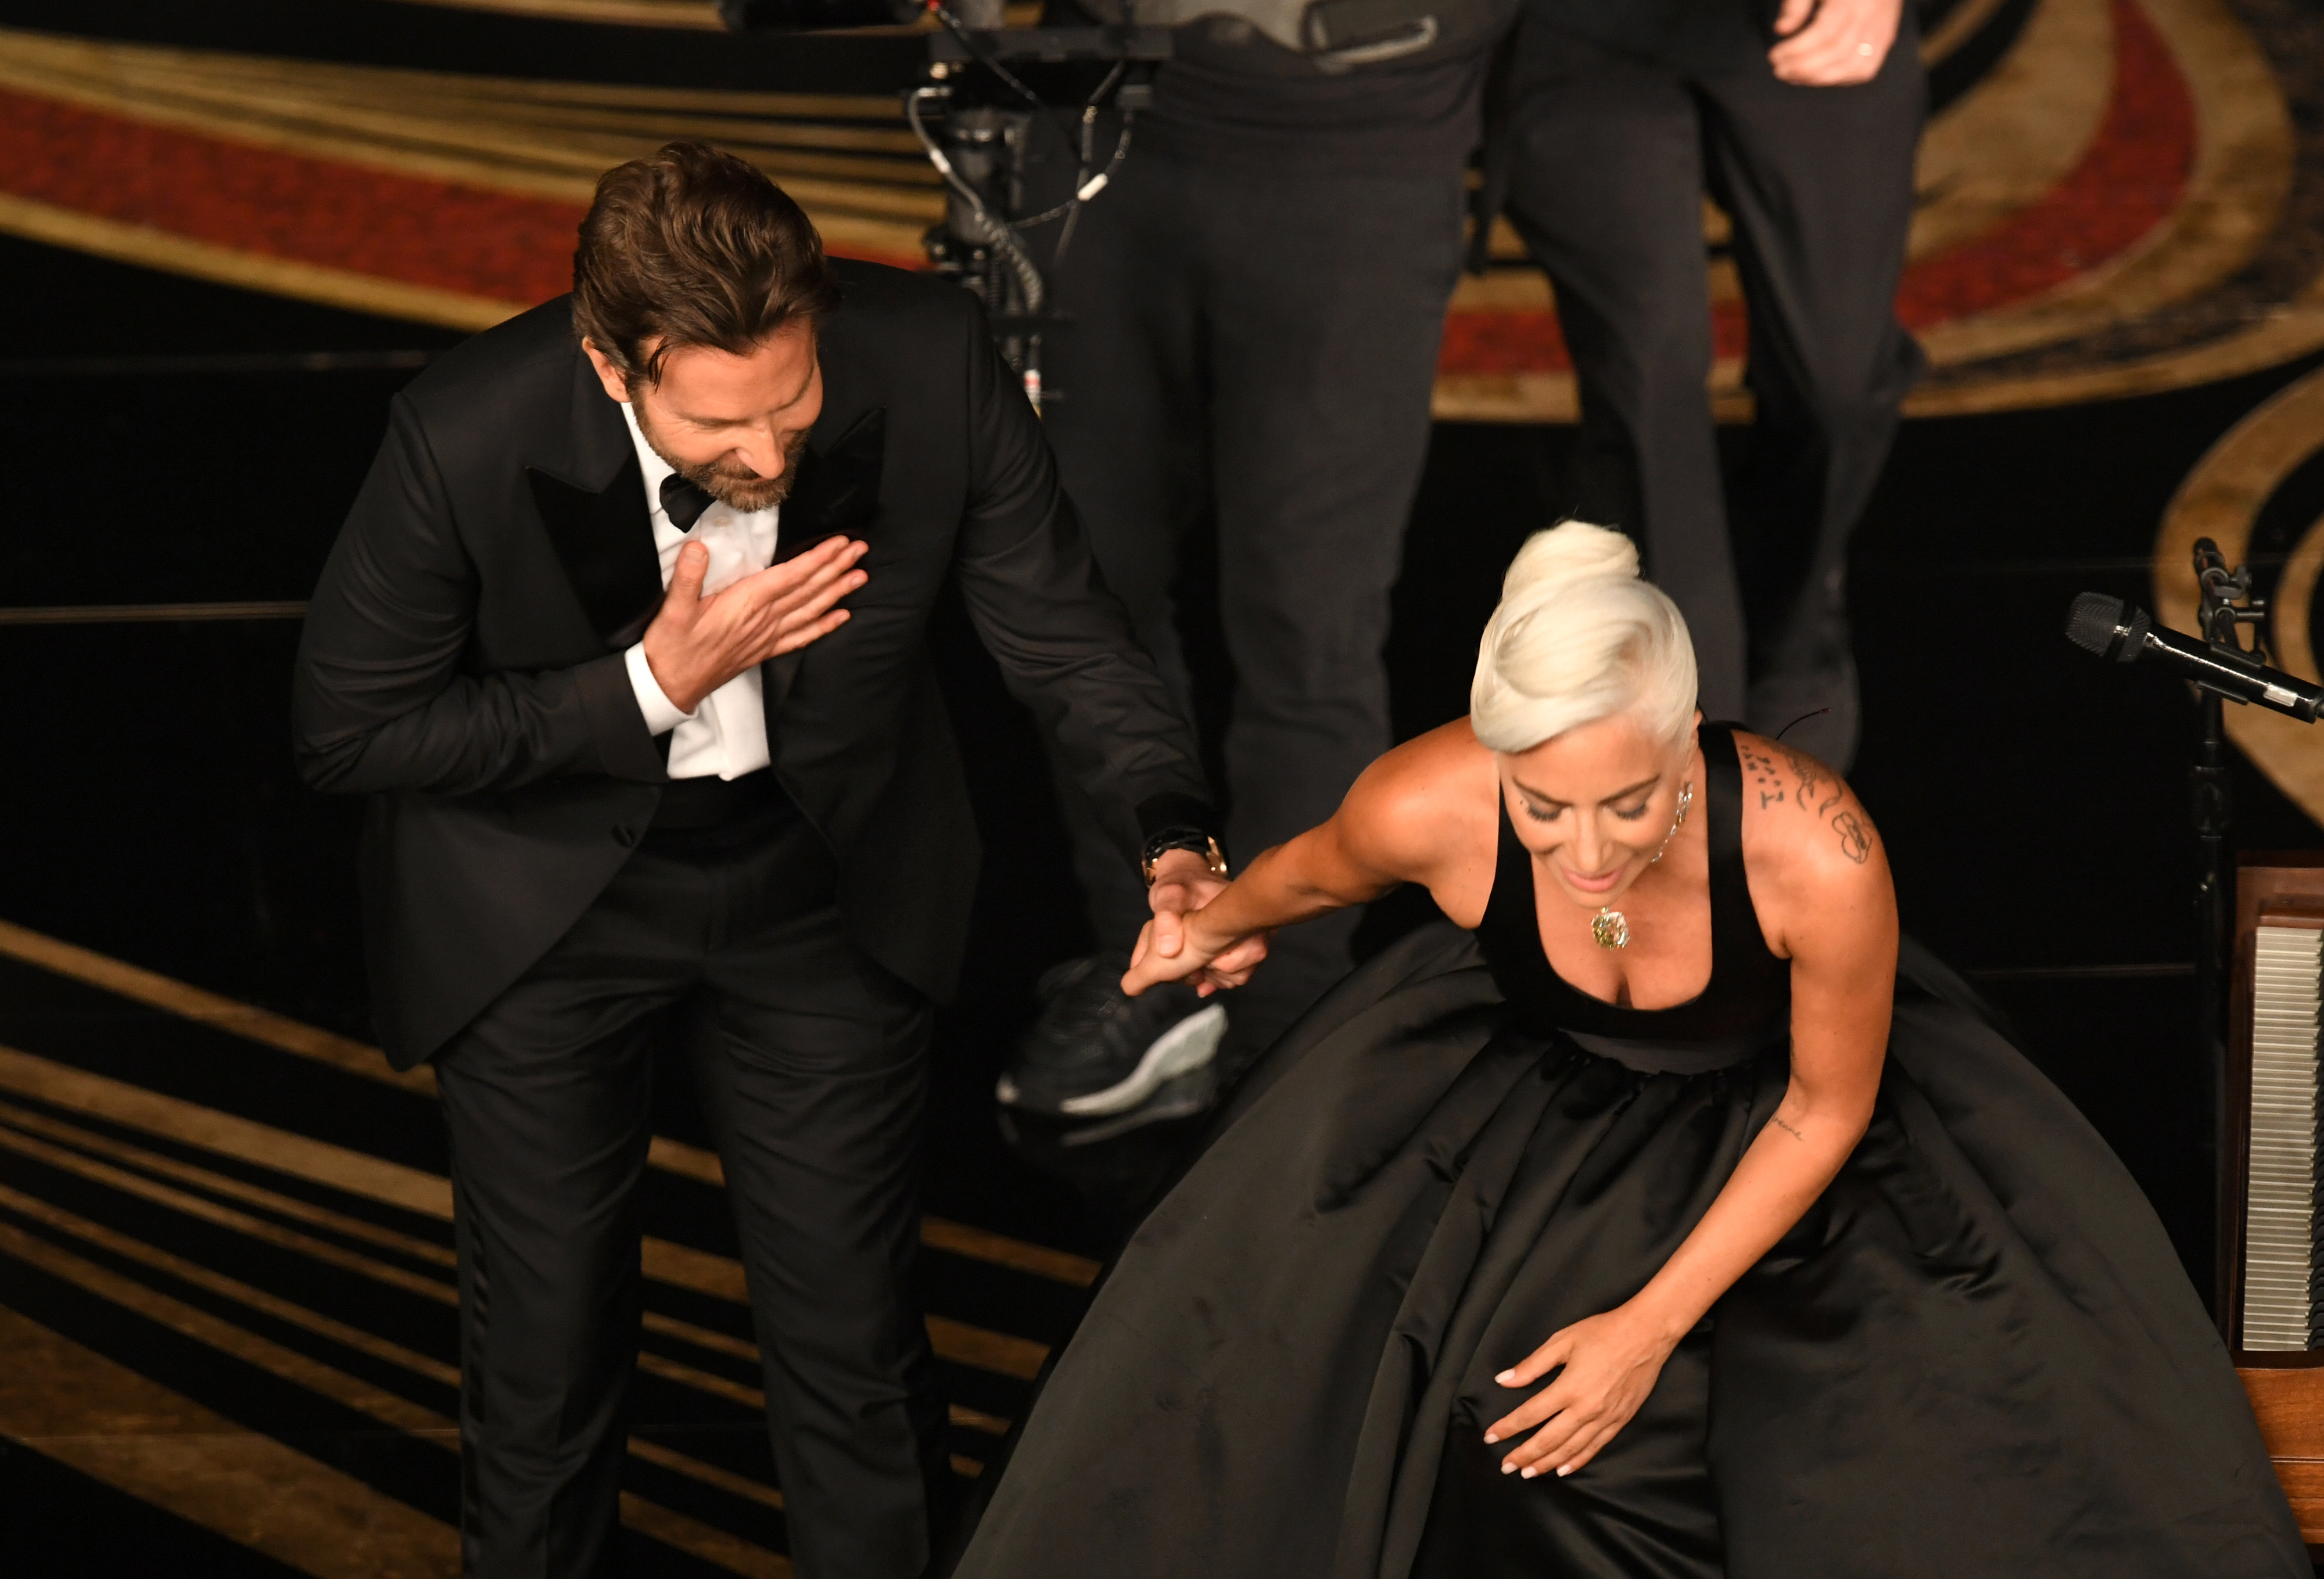 Bradley, in a bow tie and suit, helps Gaga in a black gown up the stairs to the stage